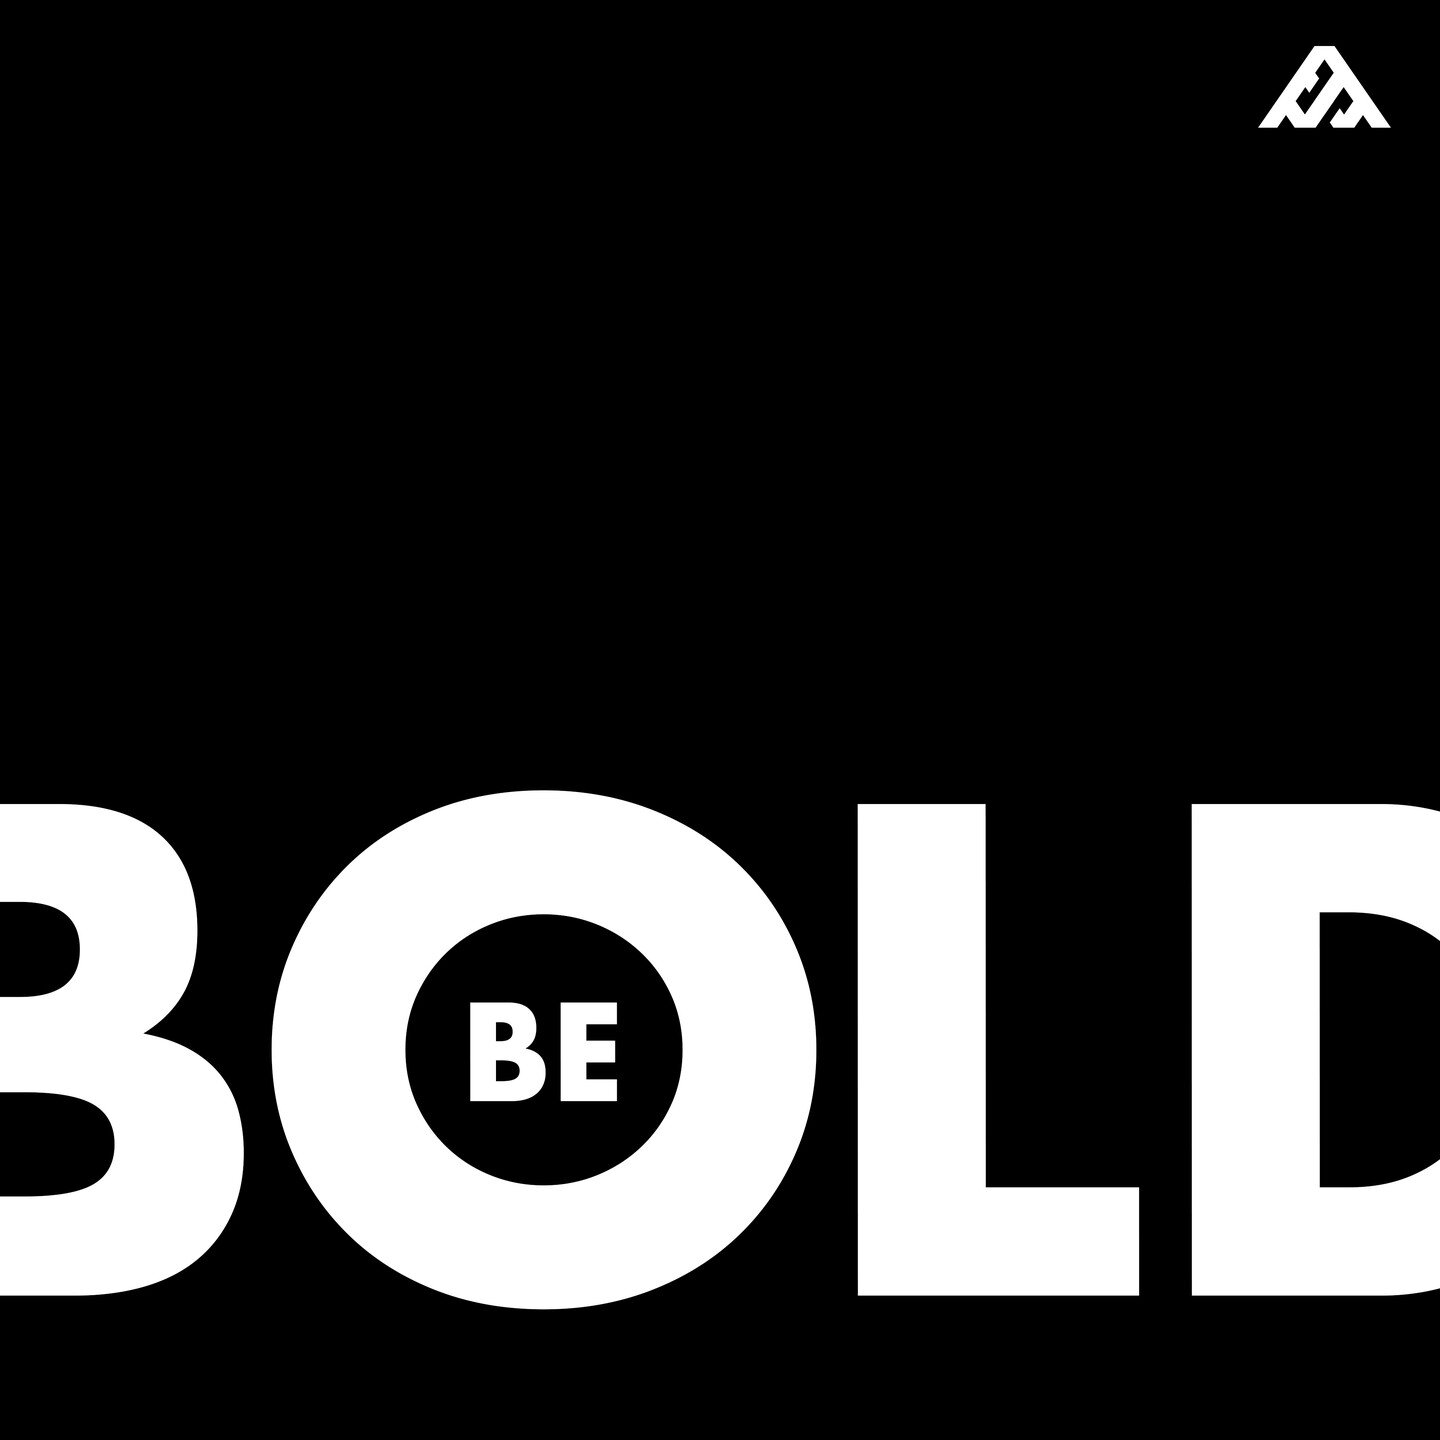 BE BOLD

This can apply to our websites, photography, graphics, logos, and video content... but it can also apply to how we engage with real people around us every day. Taking the initiative to approach someone, reach out, get to know them, ask quest